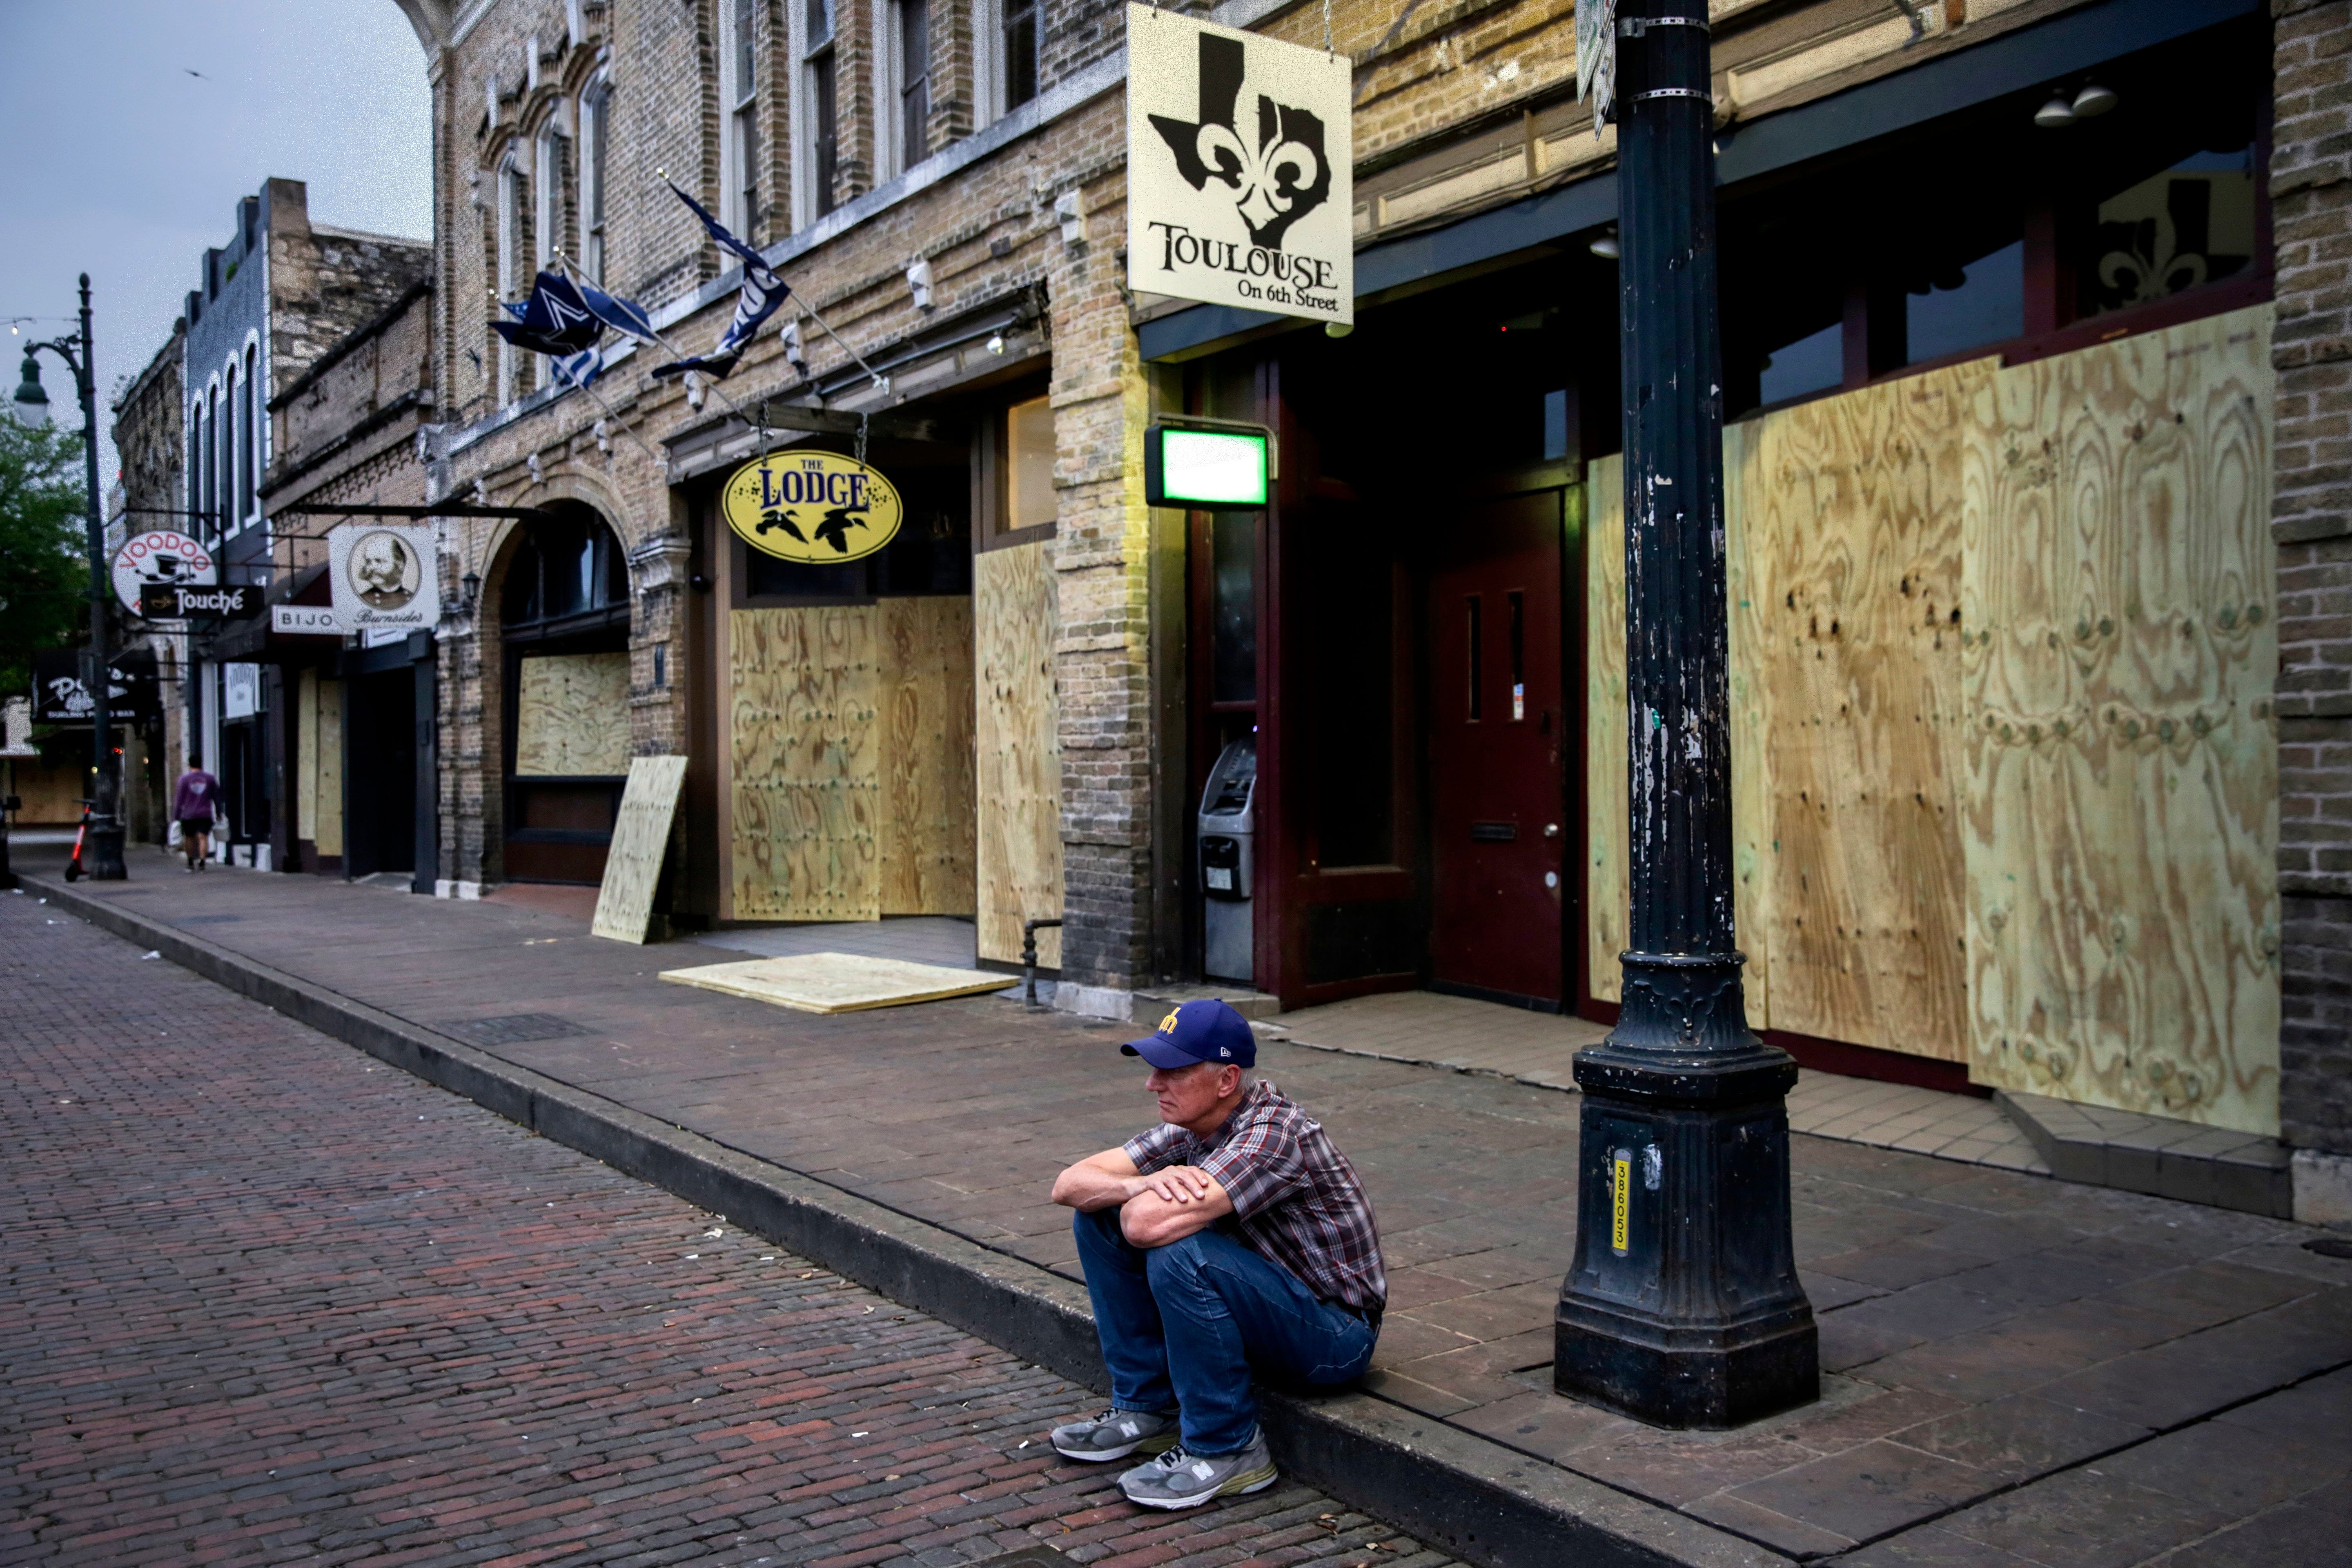 Chris Jones, 65, sits on the curb in front of several bars that are boarded up on East 6th Street in Austin on Wednesday, March 18, 2020. This comes after Austin officials ordered closures of all bars and restaurants. "I see lost money," Jones said. "Those people have families and they are not going to get money to support themselves for six weeks."